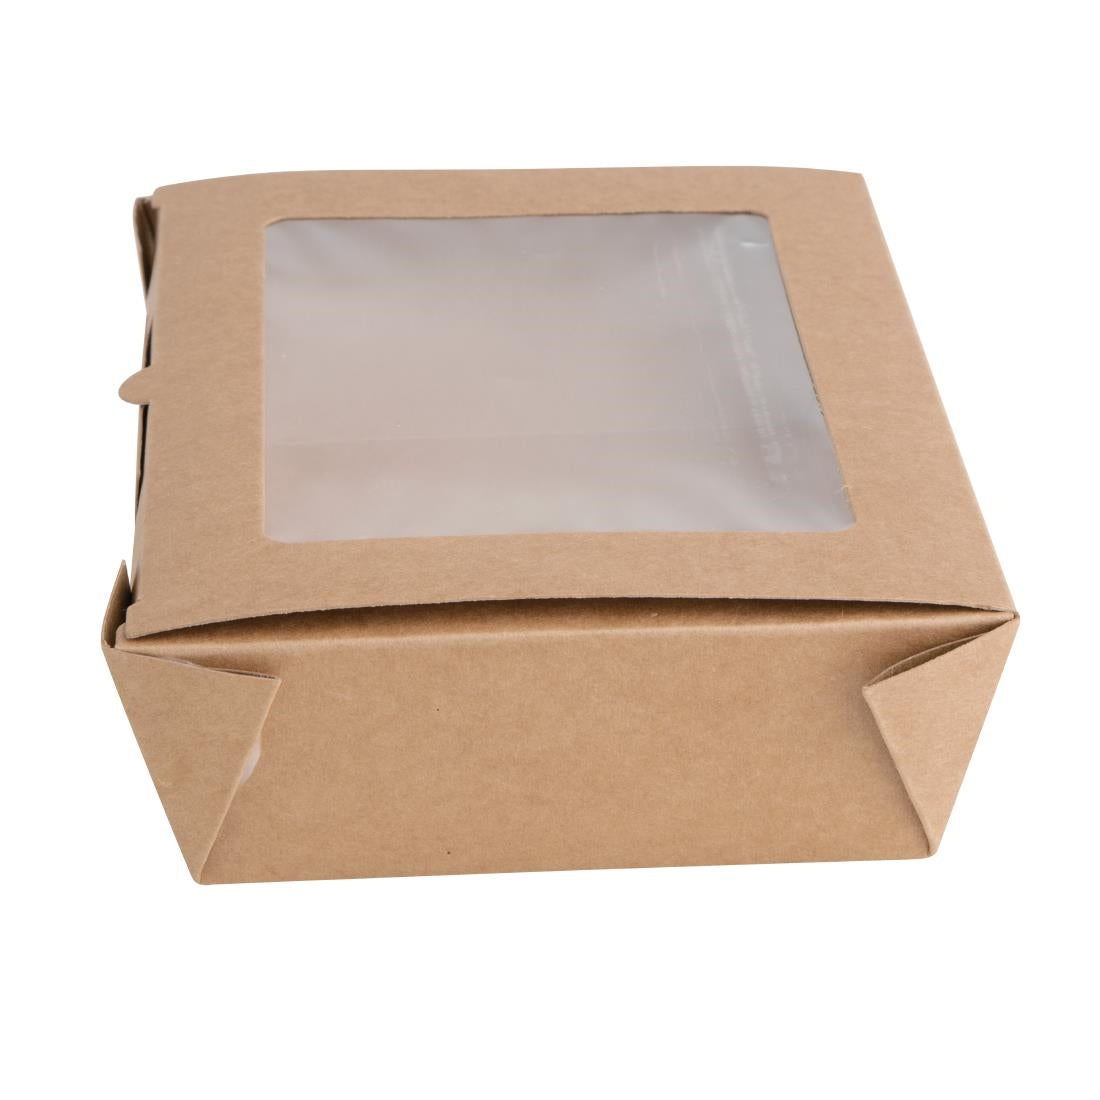 FB677 Fiesta Compostable Salad Boxes with PLA Windows 1200ml (Pack of 200) JD Catering Equipment Solutions Ltd